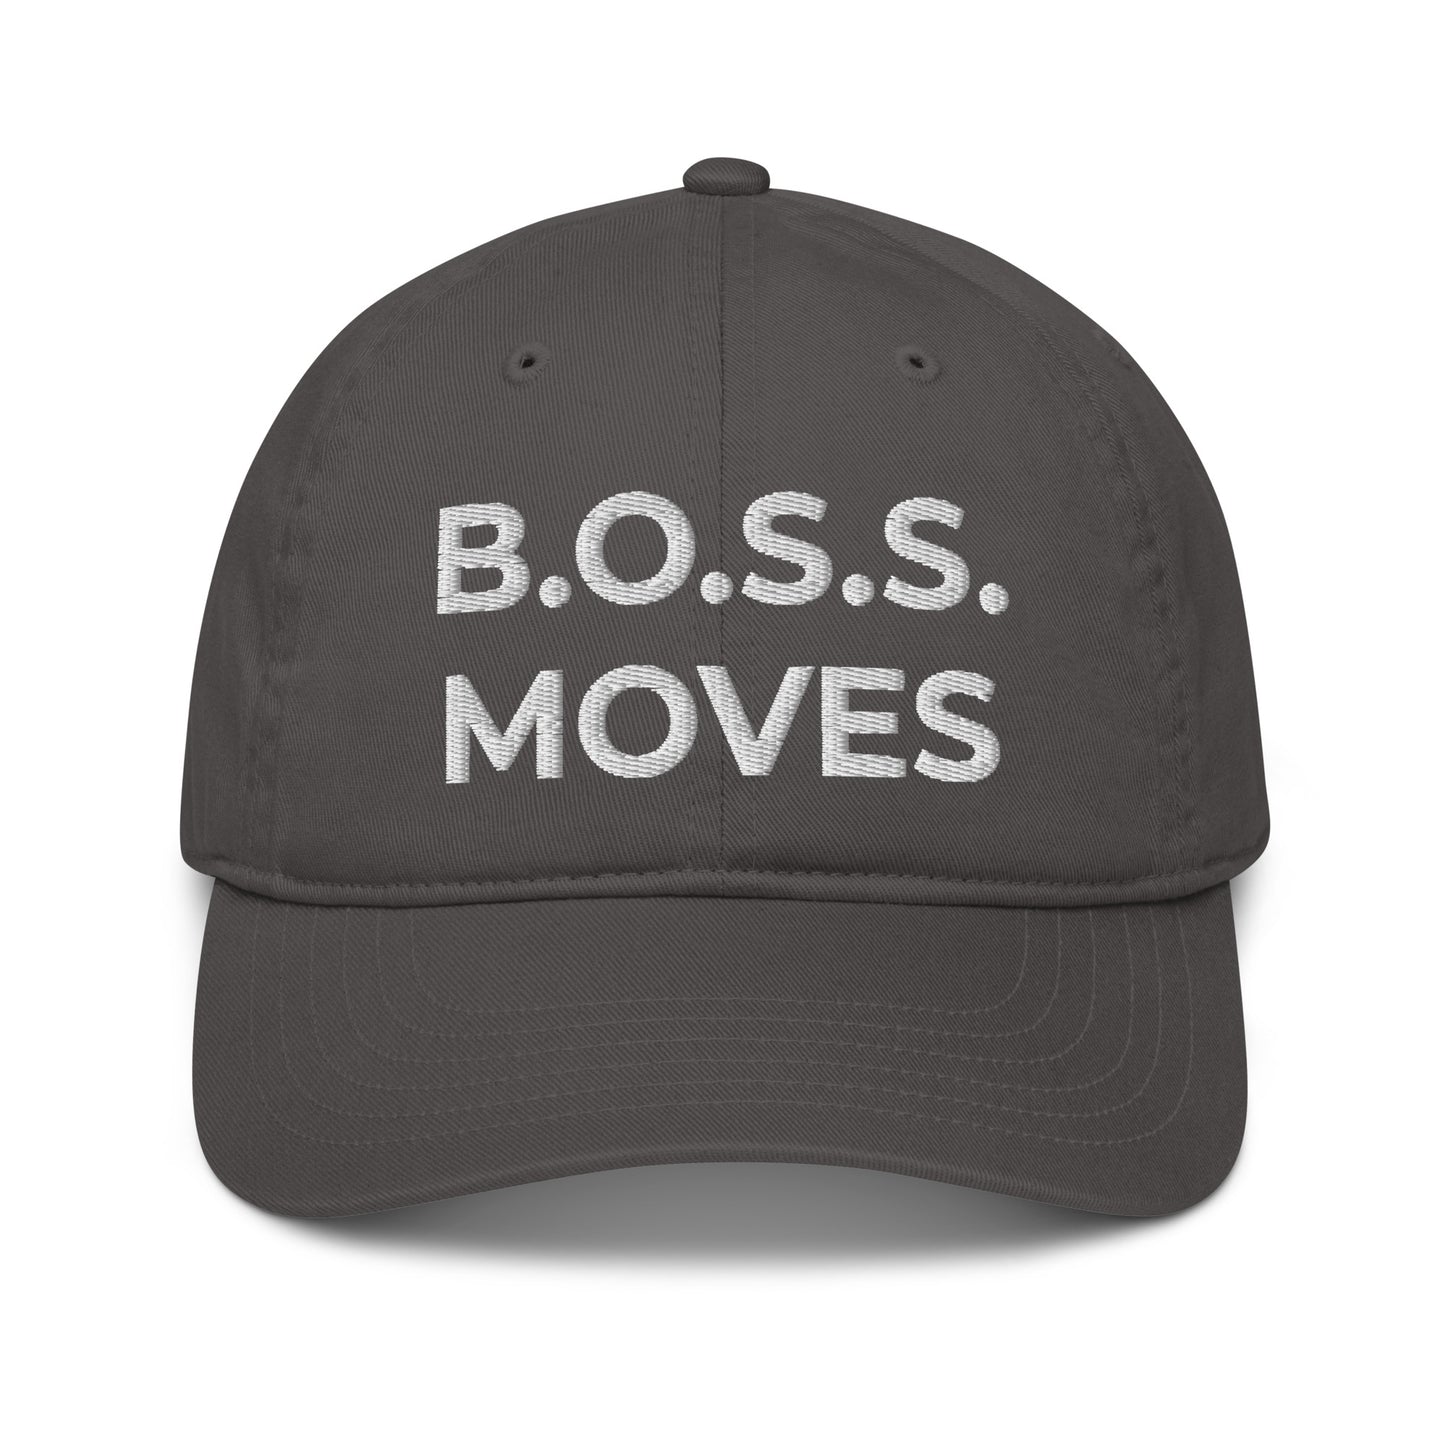 B.O.S.S. Moves Organic Hat by Myron Golden